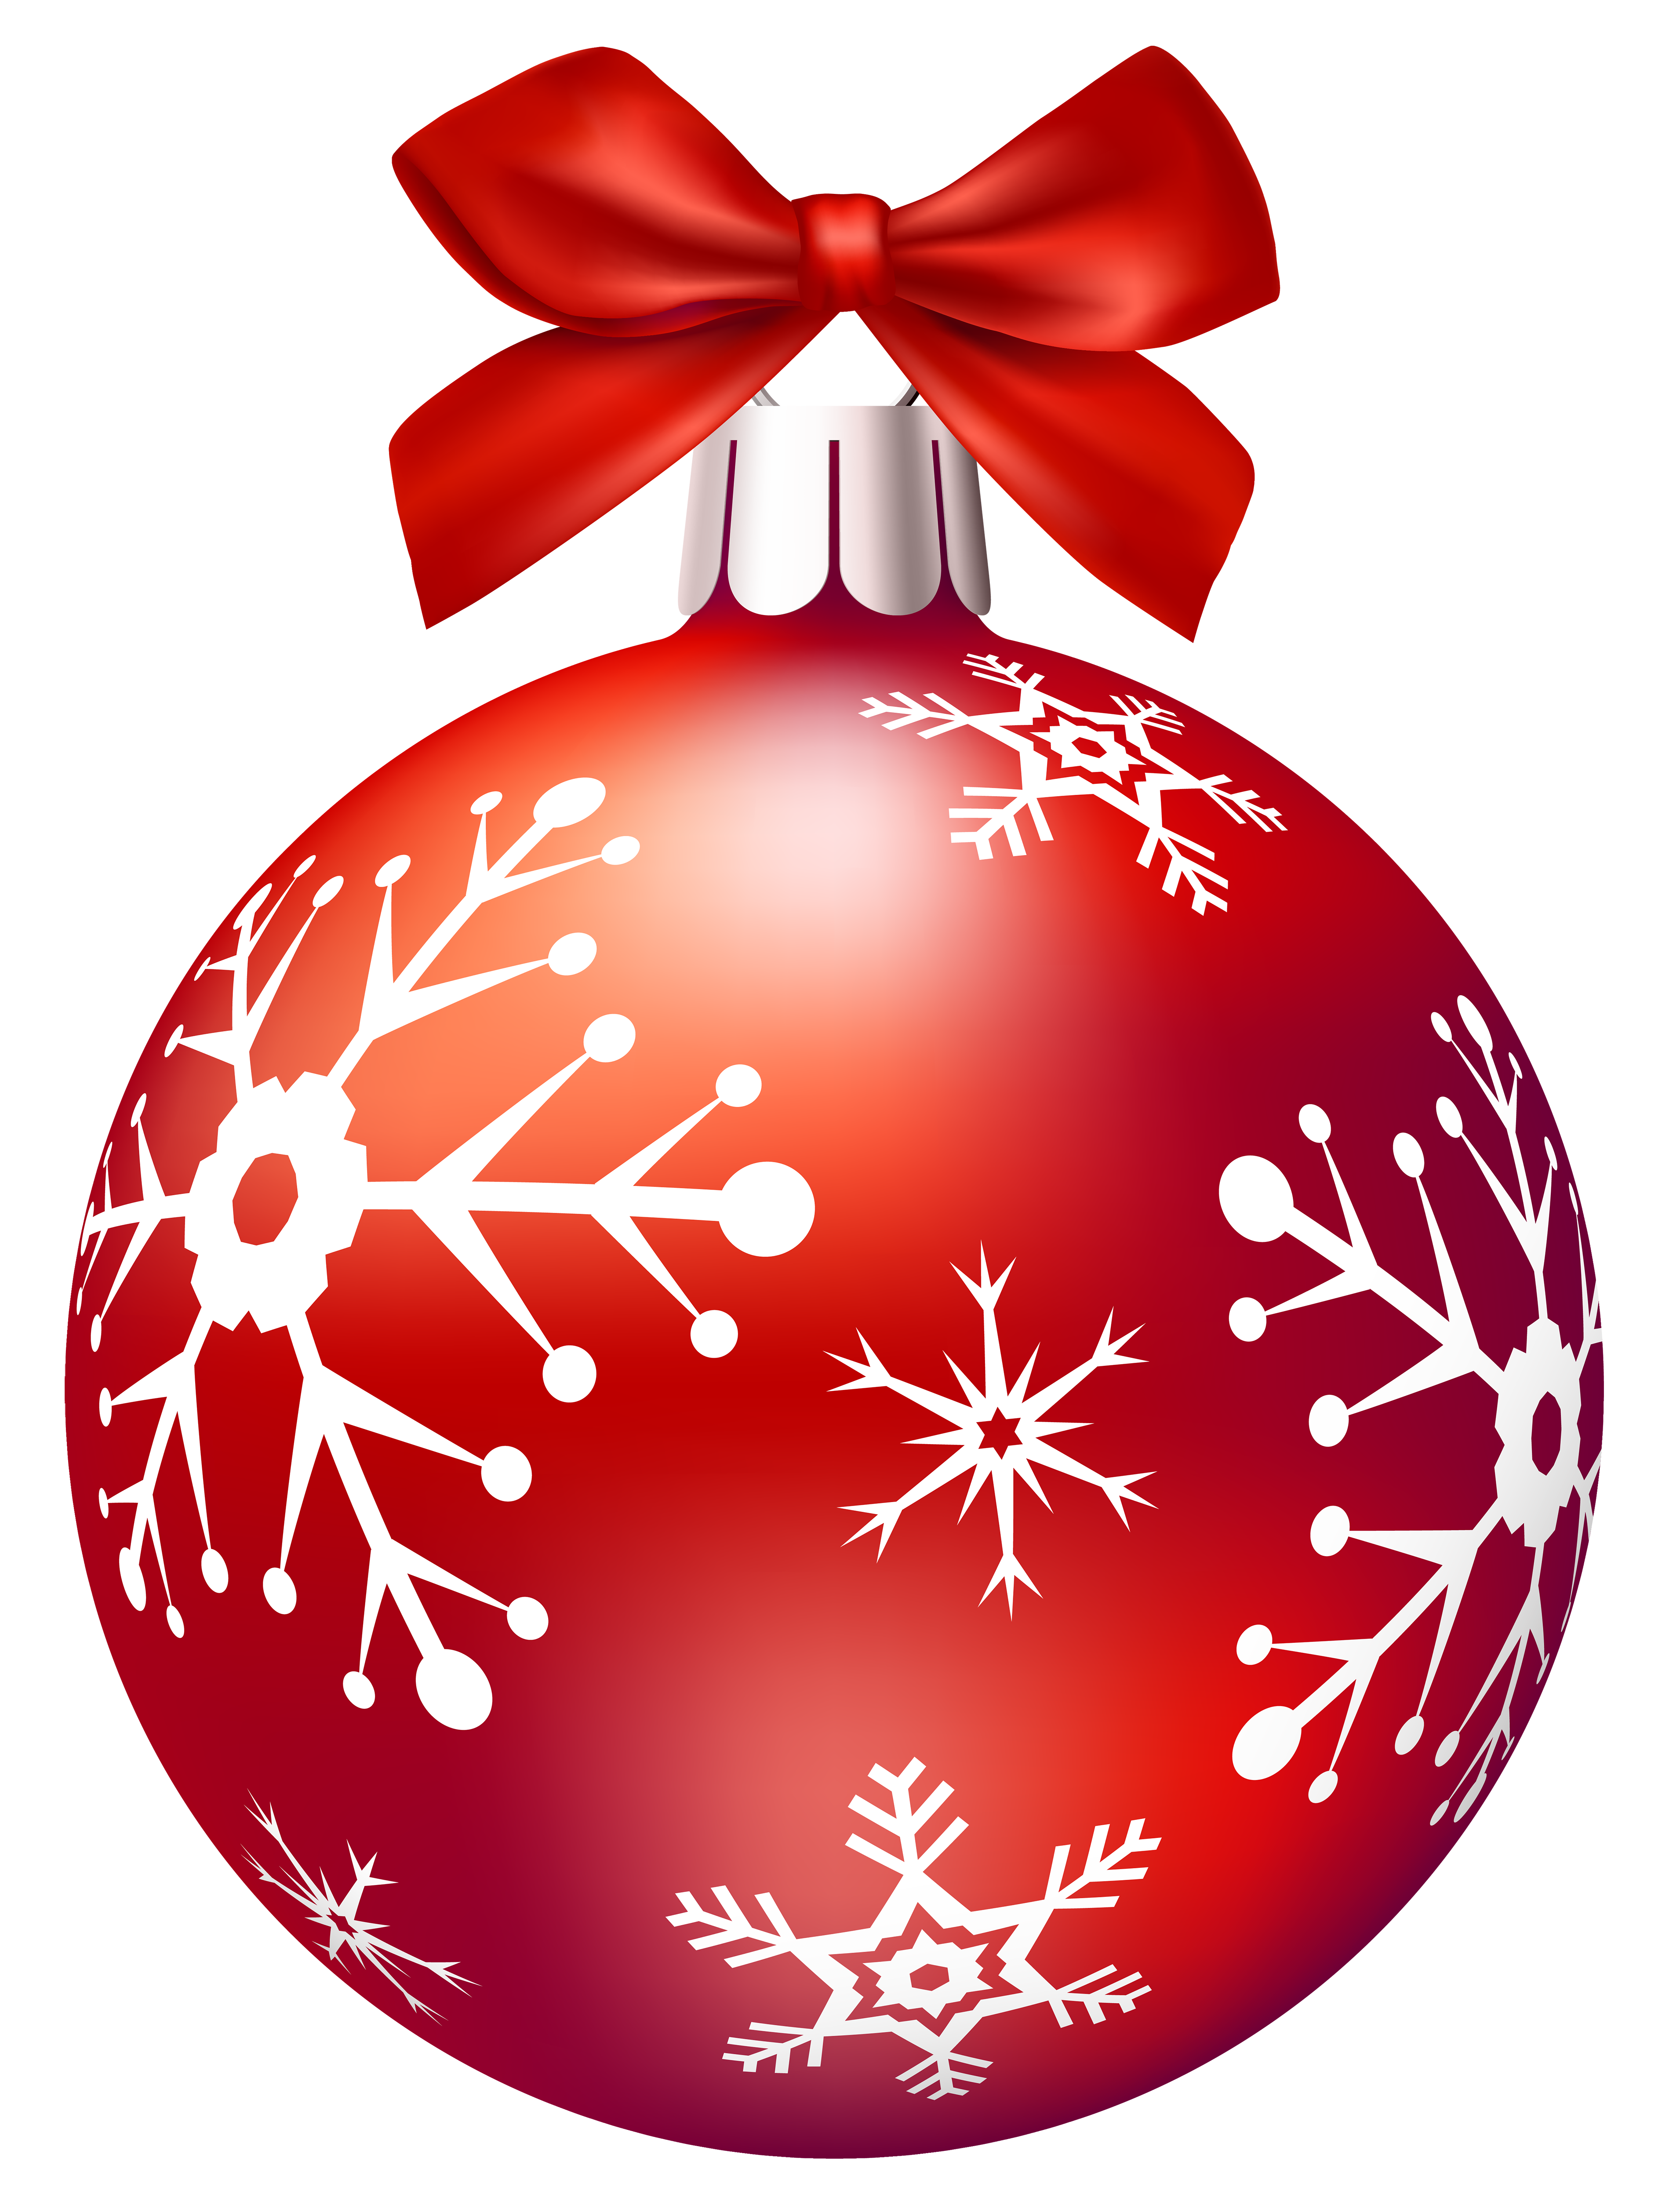 Ornaments clipart shiny red. Christmas balls png clip